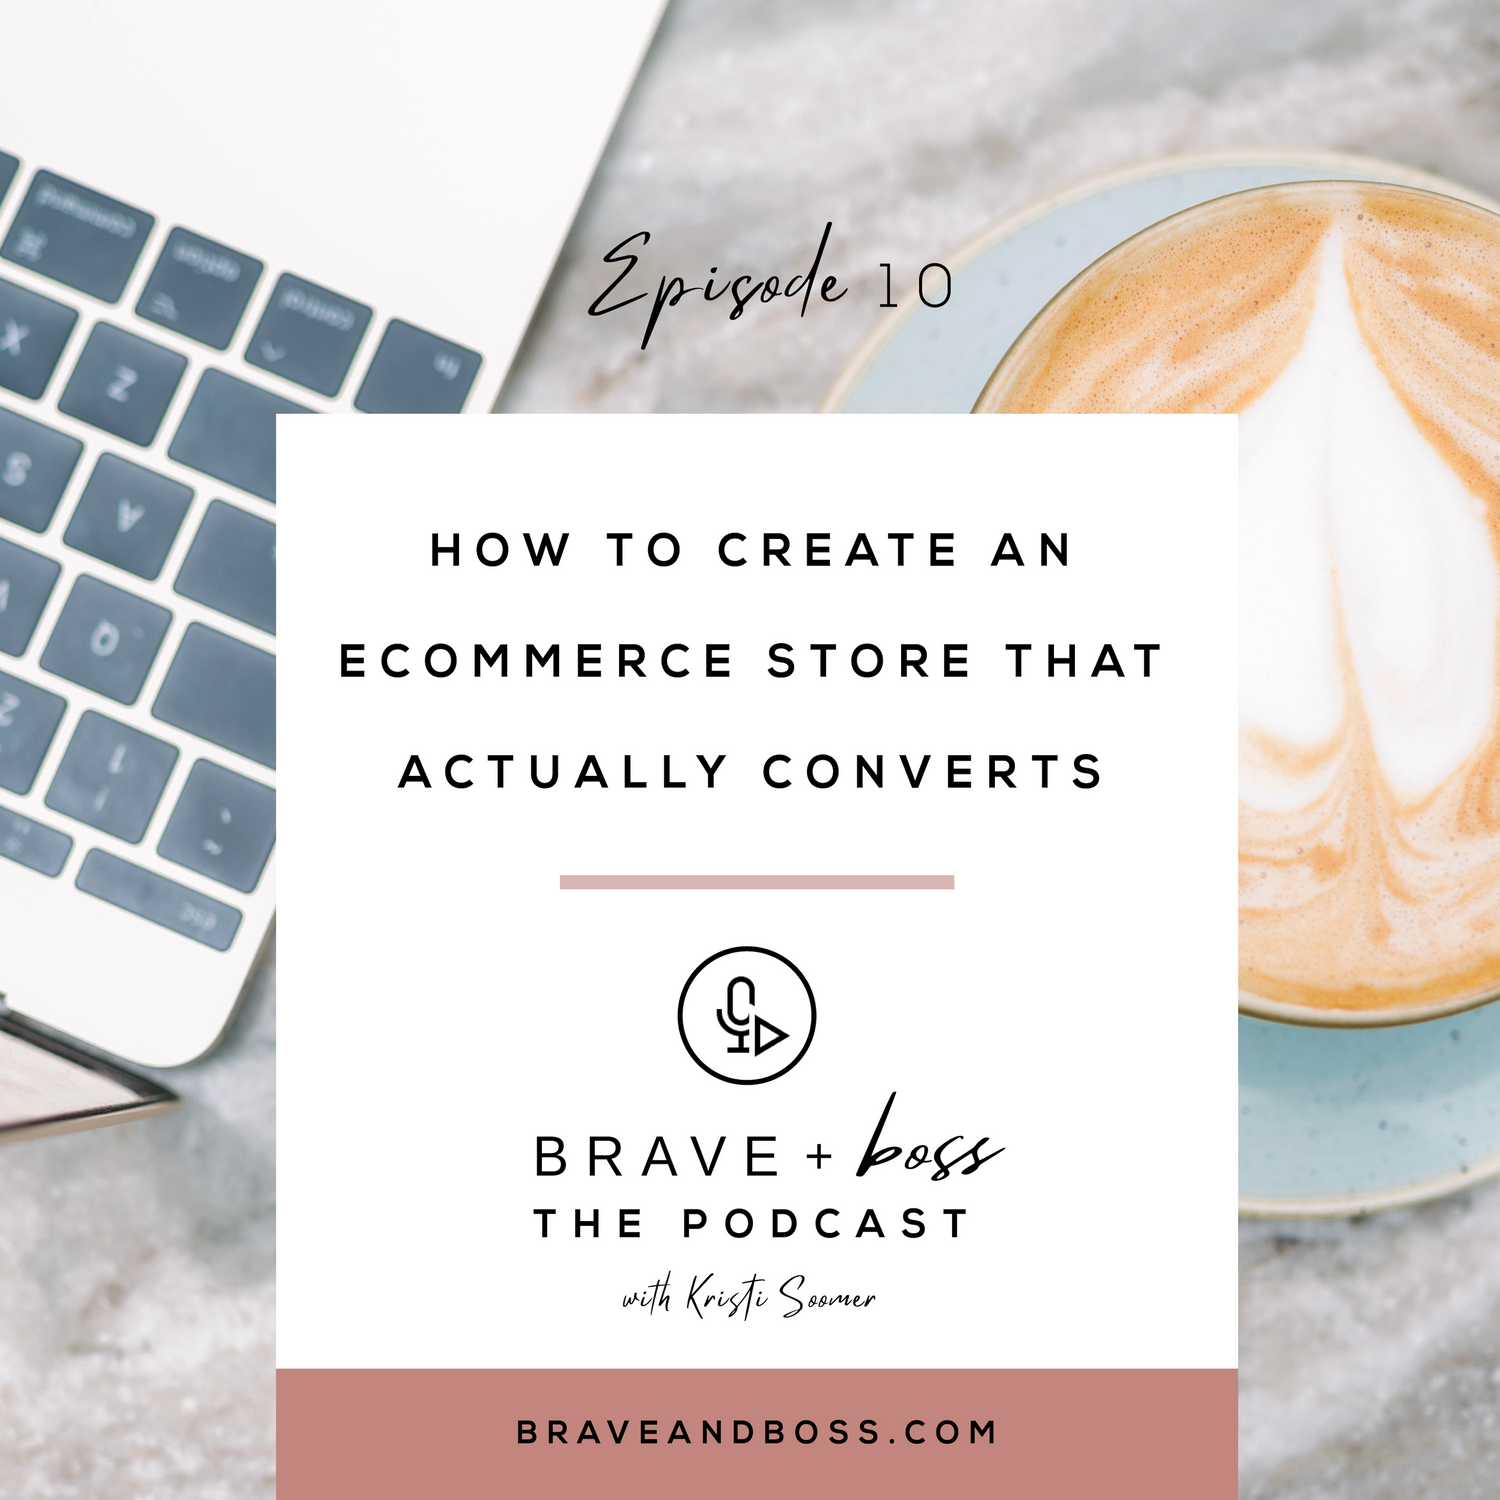 How to Create an eCommerce Store that Actually Converts